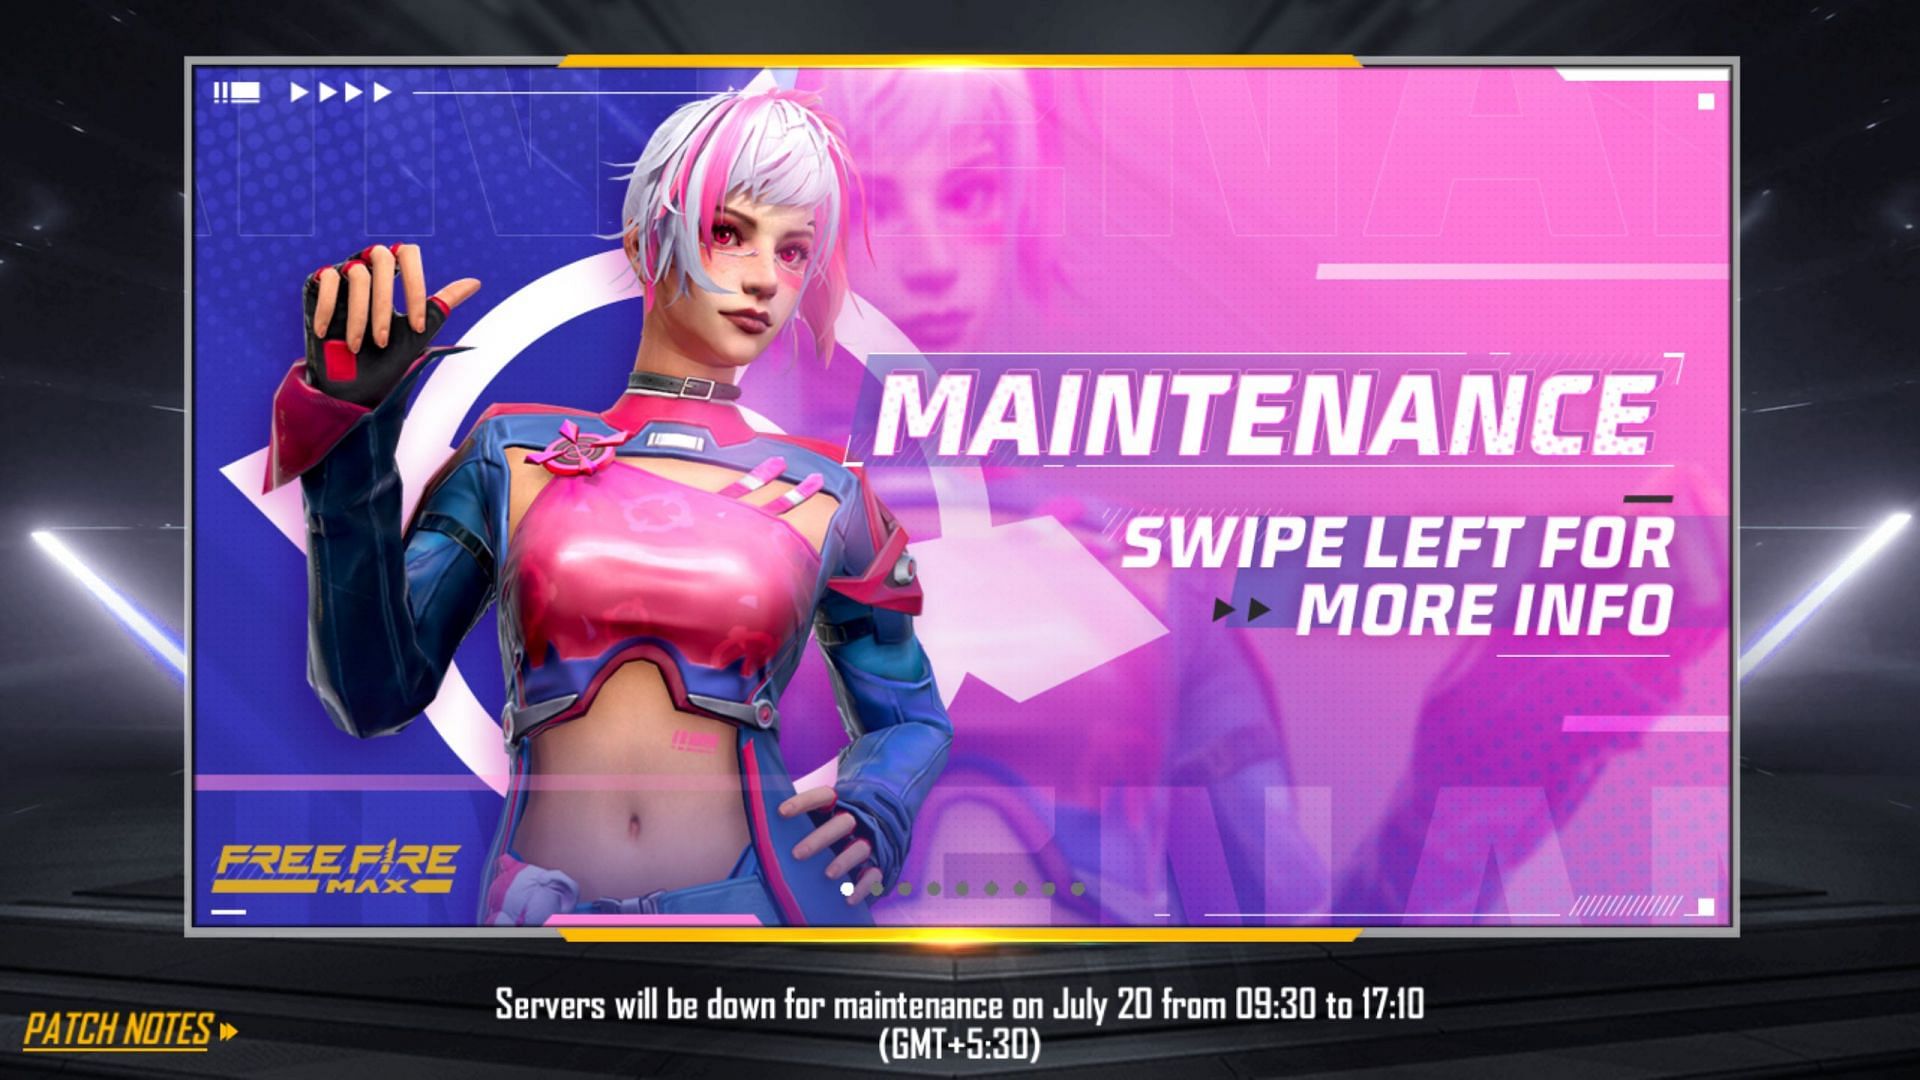 Free Fire on PC OB35 'Fifth Anniversary' Update Patch Notes: New weapons,  Character changes, and more - MEmu Blog